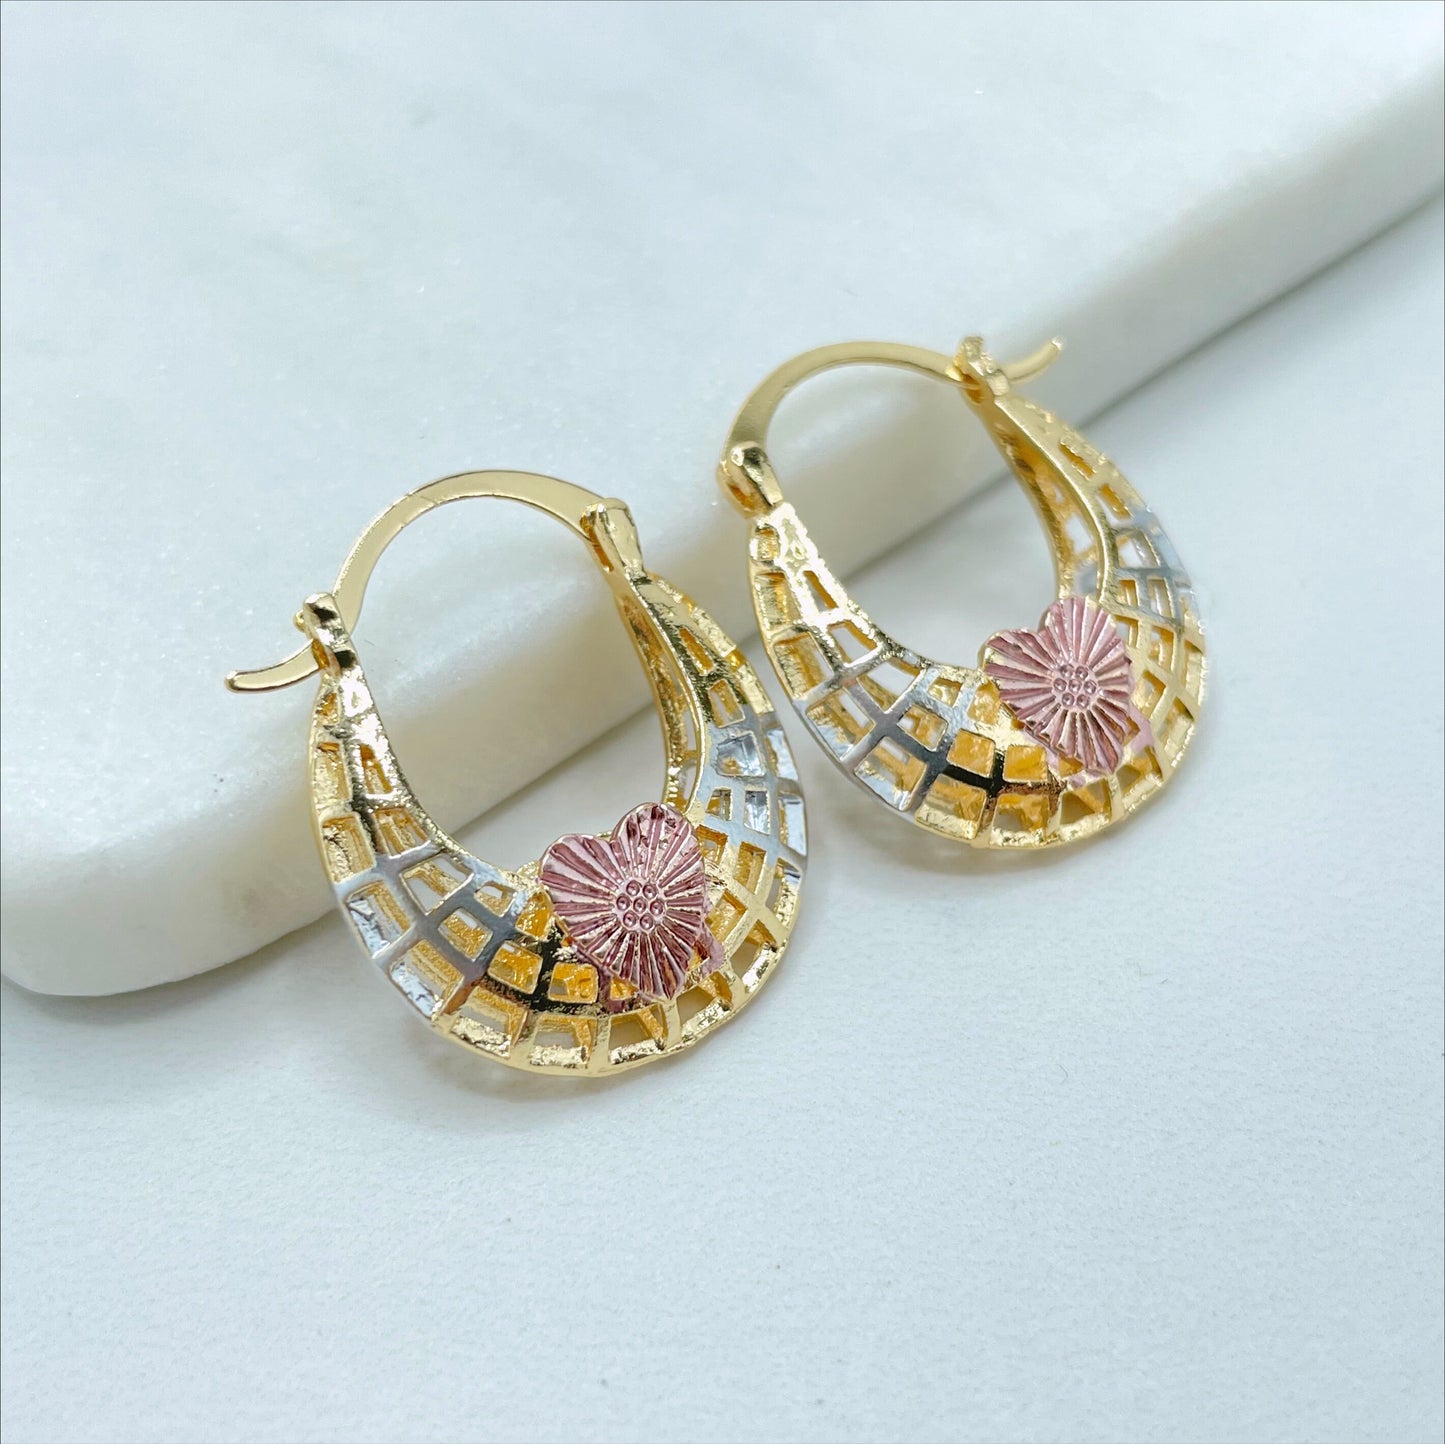 18k Gold Filled, Three Color 21mm Basket Earrings, 6mm Thickness, Wholesale Jewelry Making Supplies